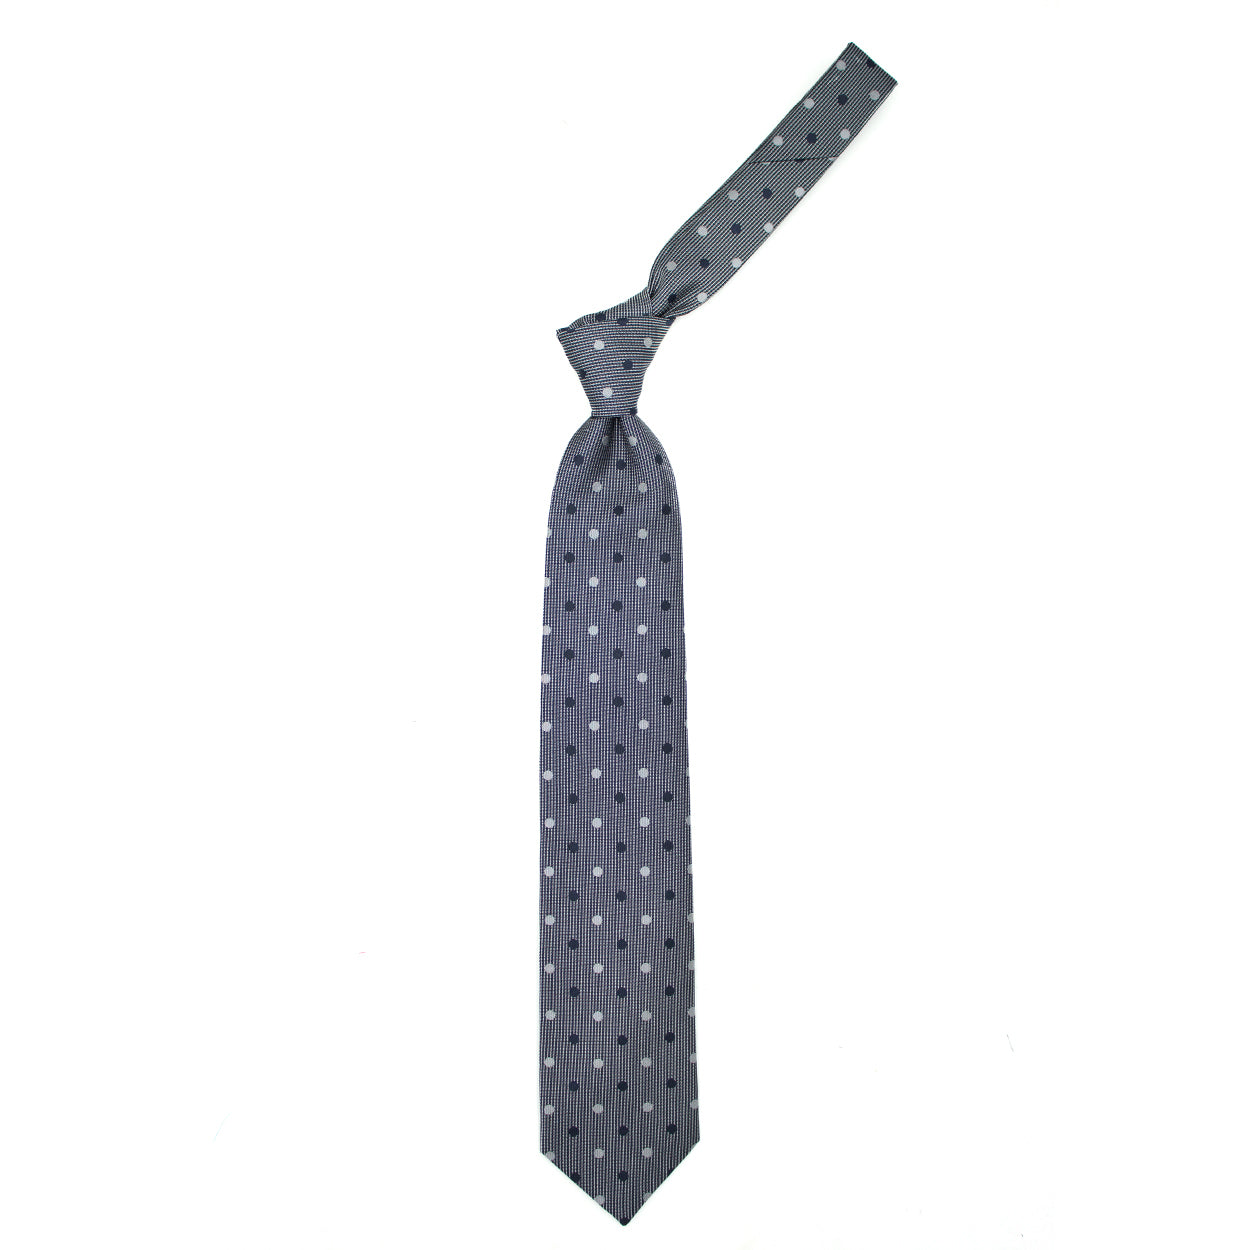 Blue and grey polka dot textured tie